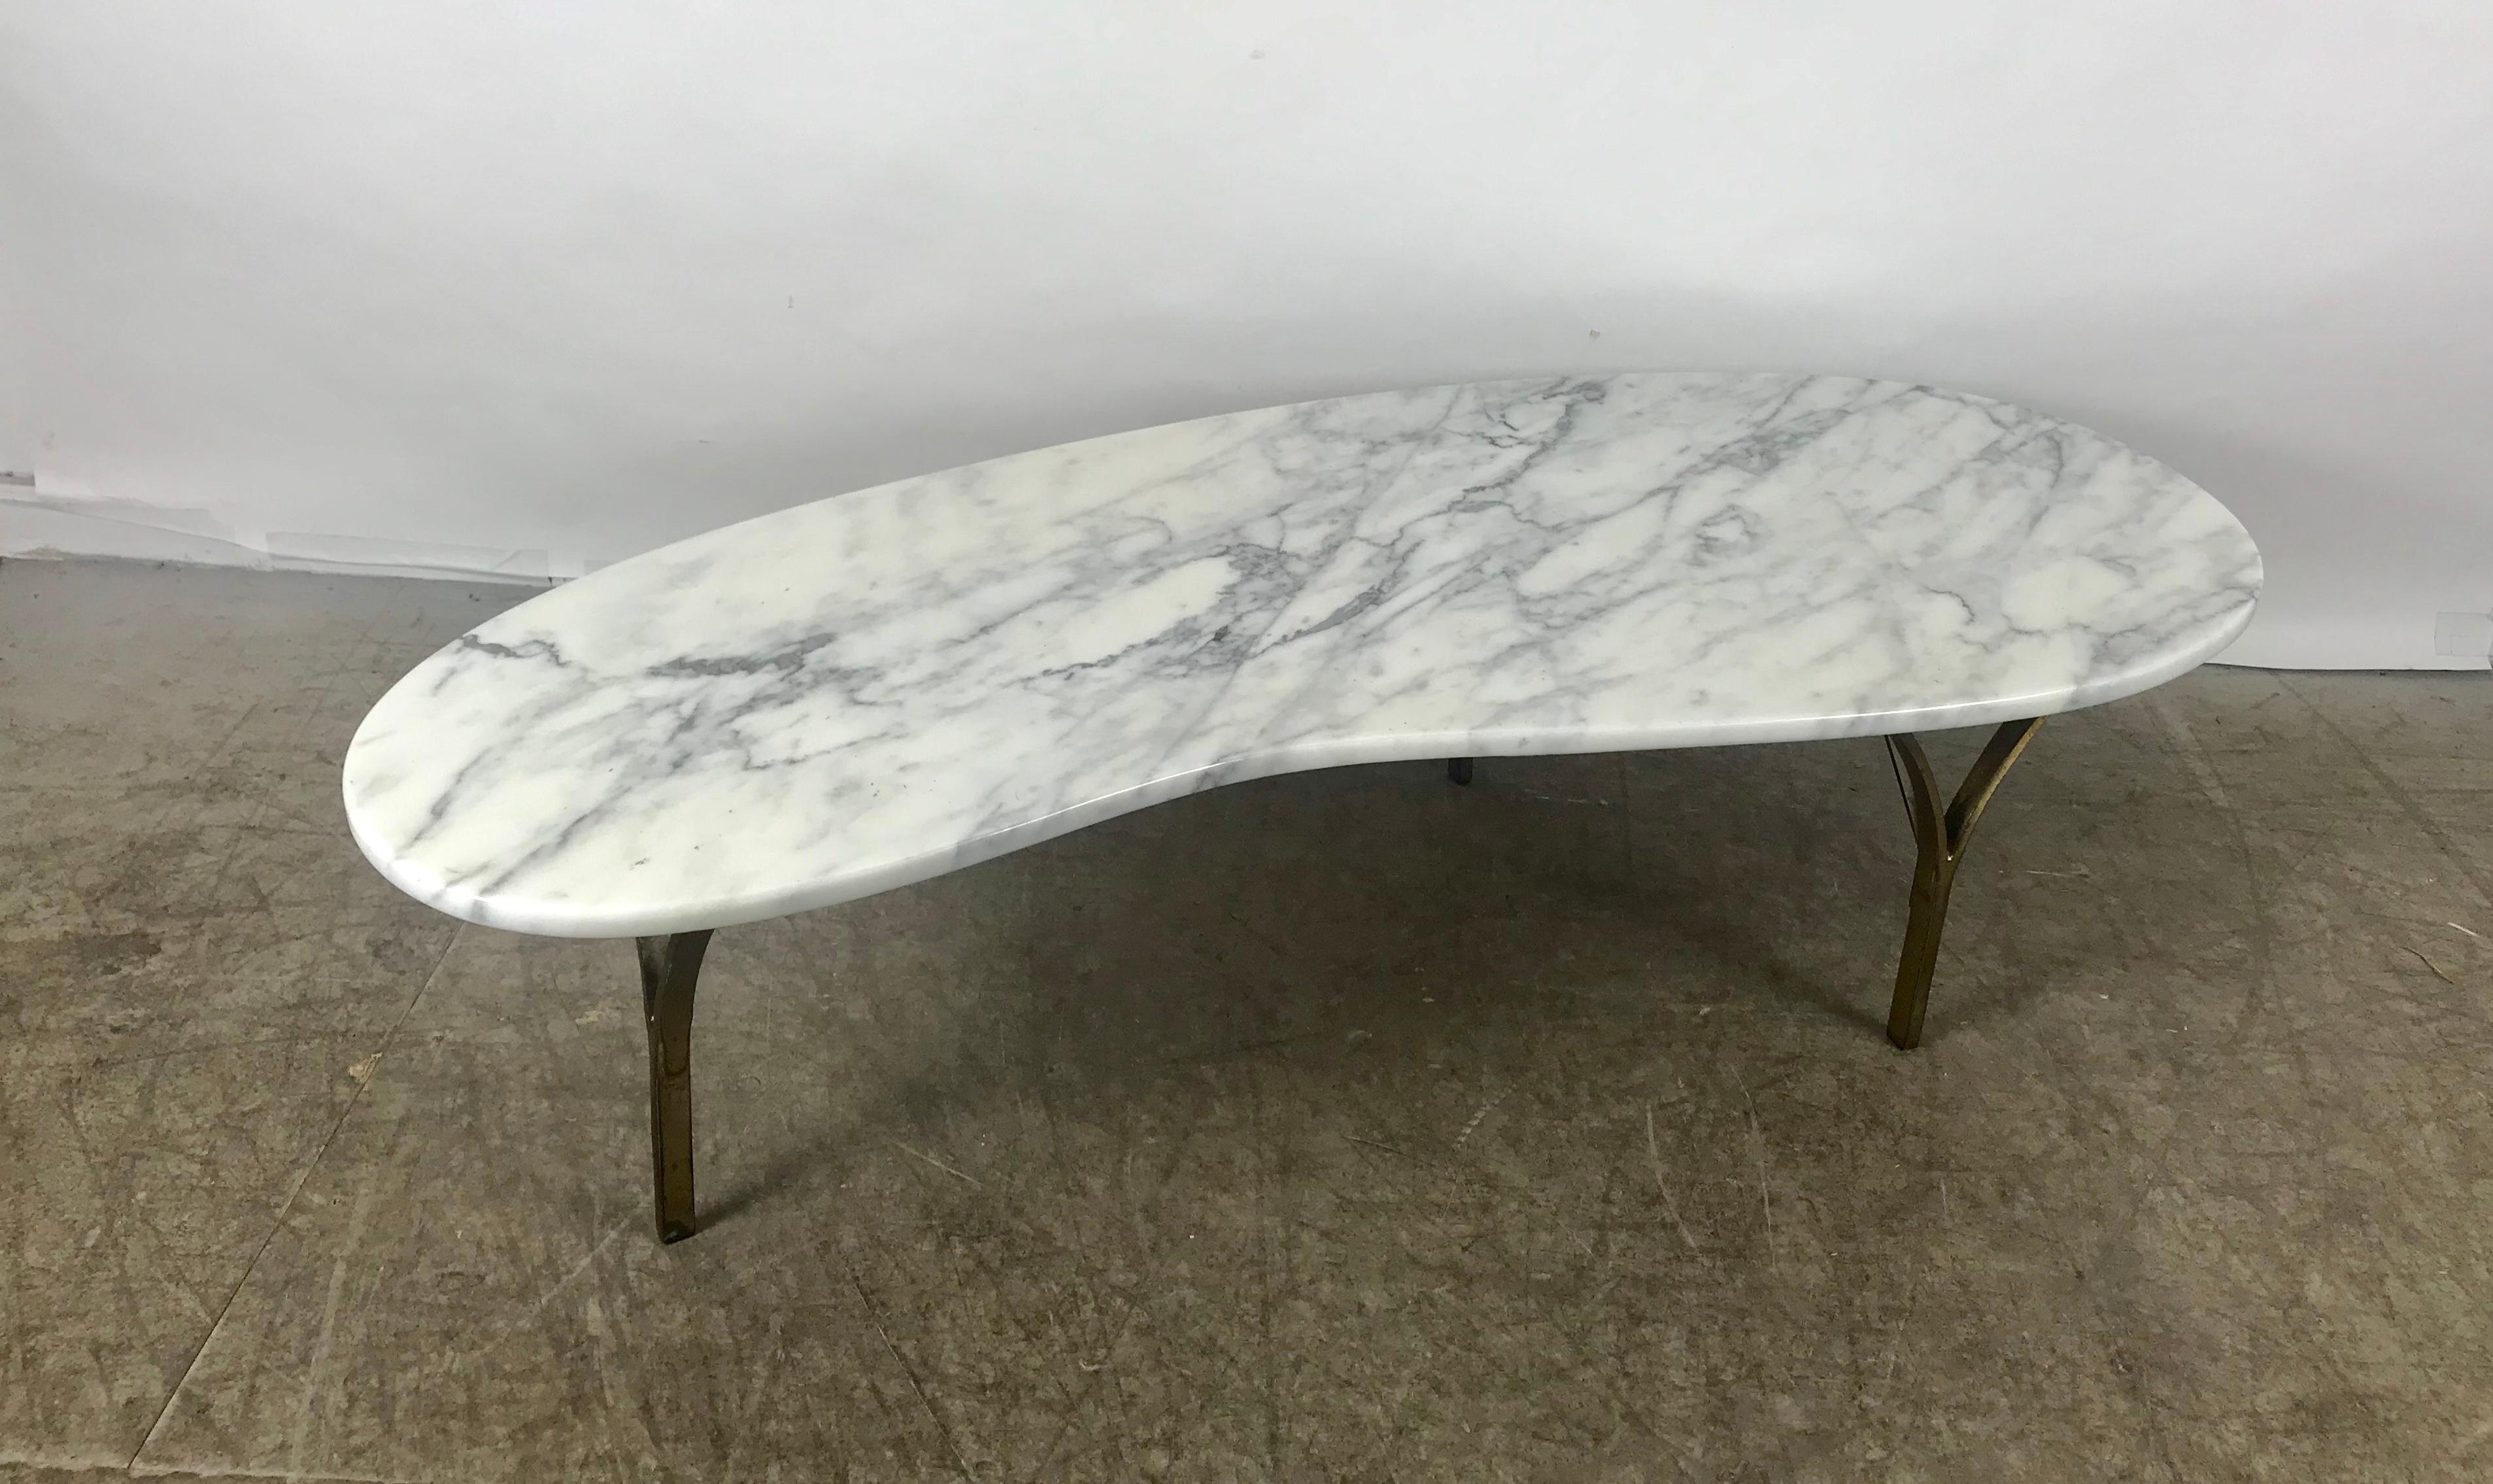 Stunning kidney shape Italian marble and brass coffee or cocktail table, stylized brass base, beautiful Kidney shape polished Italian marble. Hand delivery avail to New York City or anywhere en route from Buffalo NY.